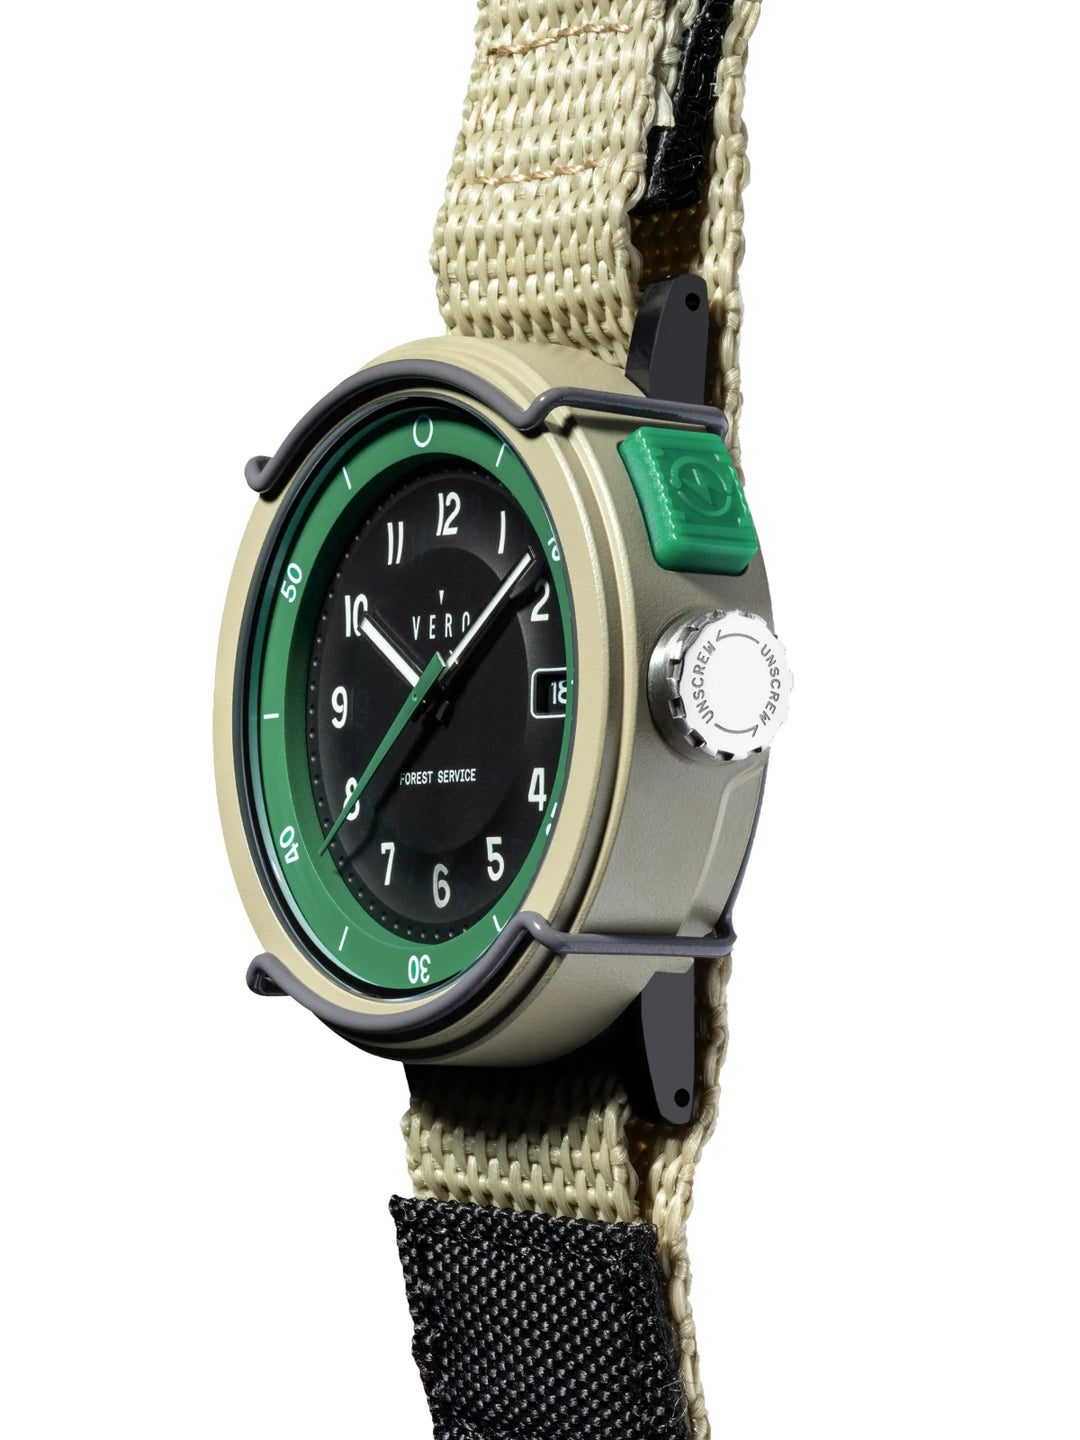 Forest Service Edition Ranger - VERO Watch Company